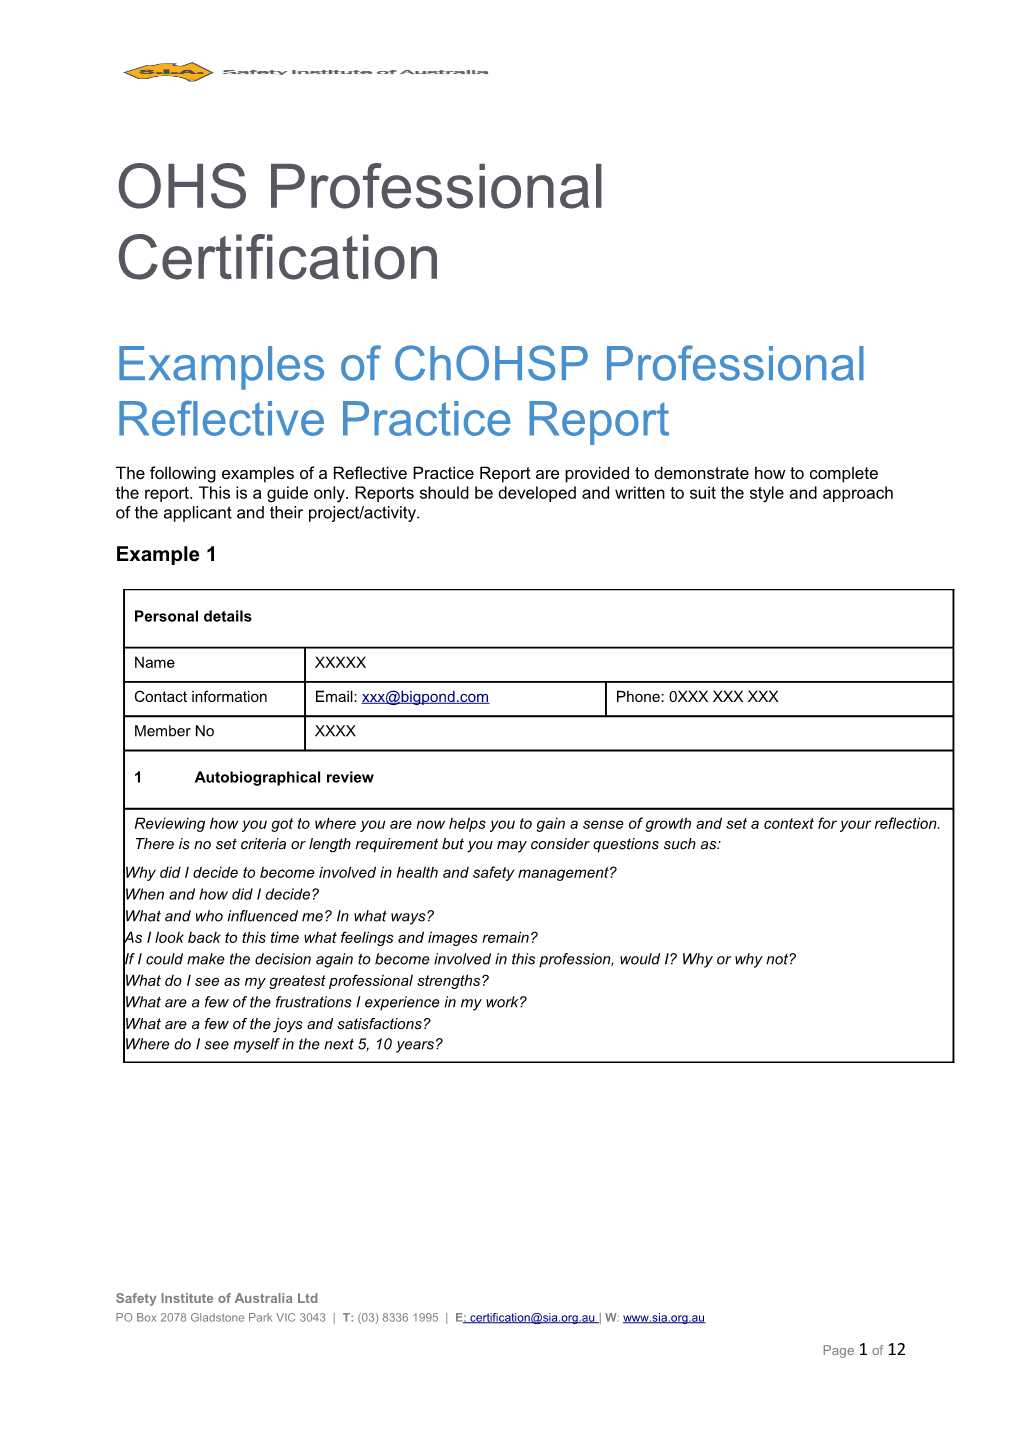 Examples of Chohsp Professional Reflective Practice Report